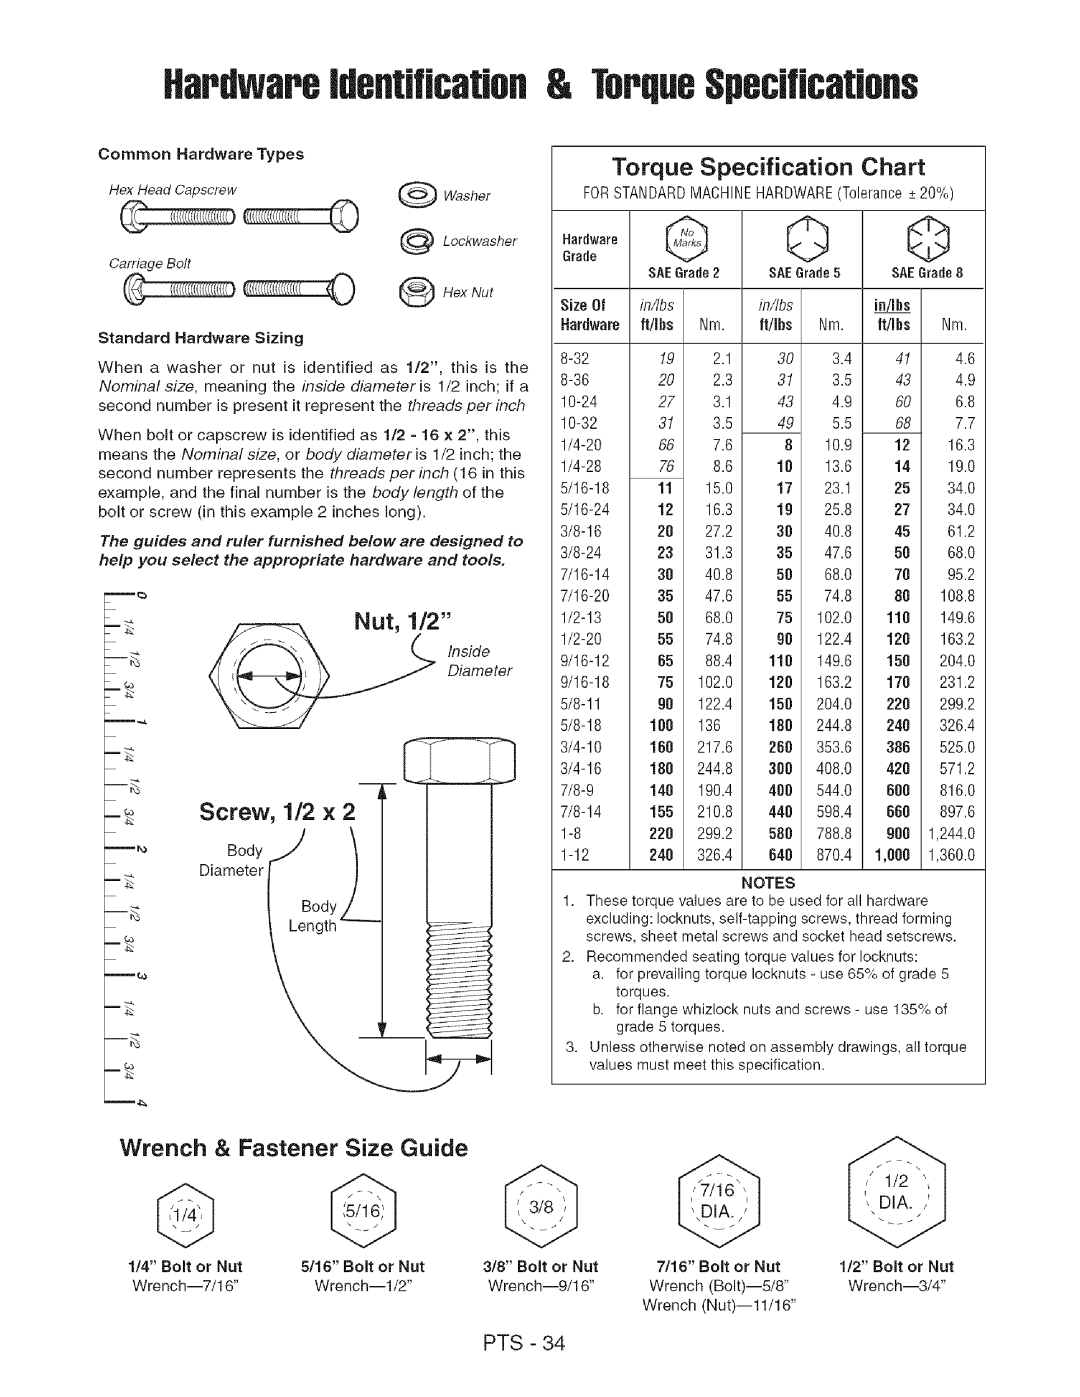 Craftsman 107.2777 manual Torque Specification Chart, Wrench & Fastener Size Guide, Nut, 1/2, Screw, 1/2 x, fltJfit, SizeOf 